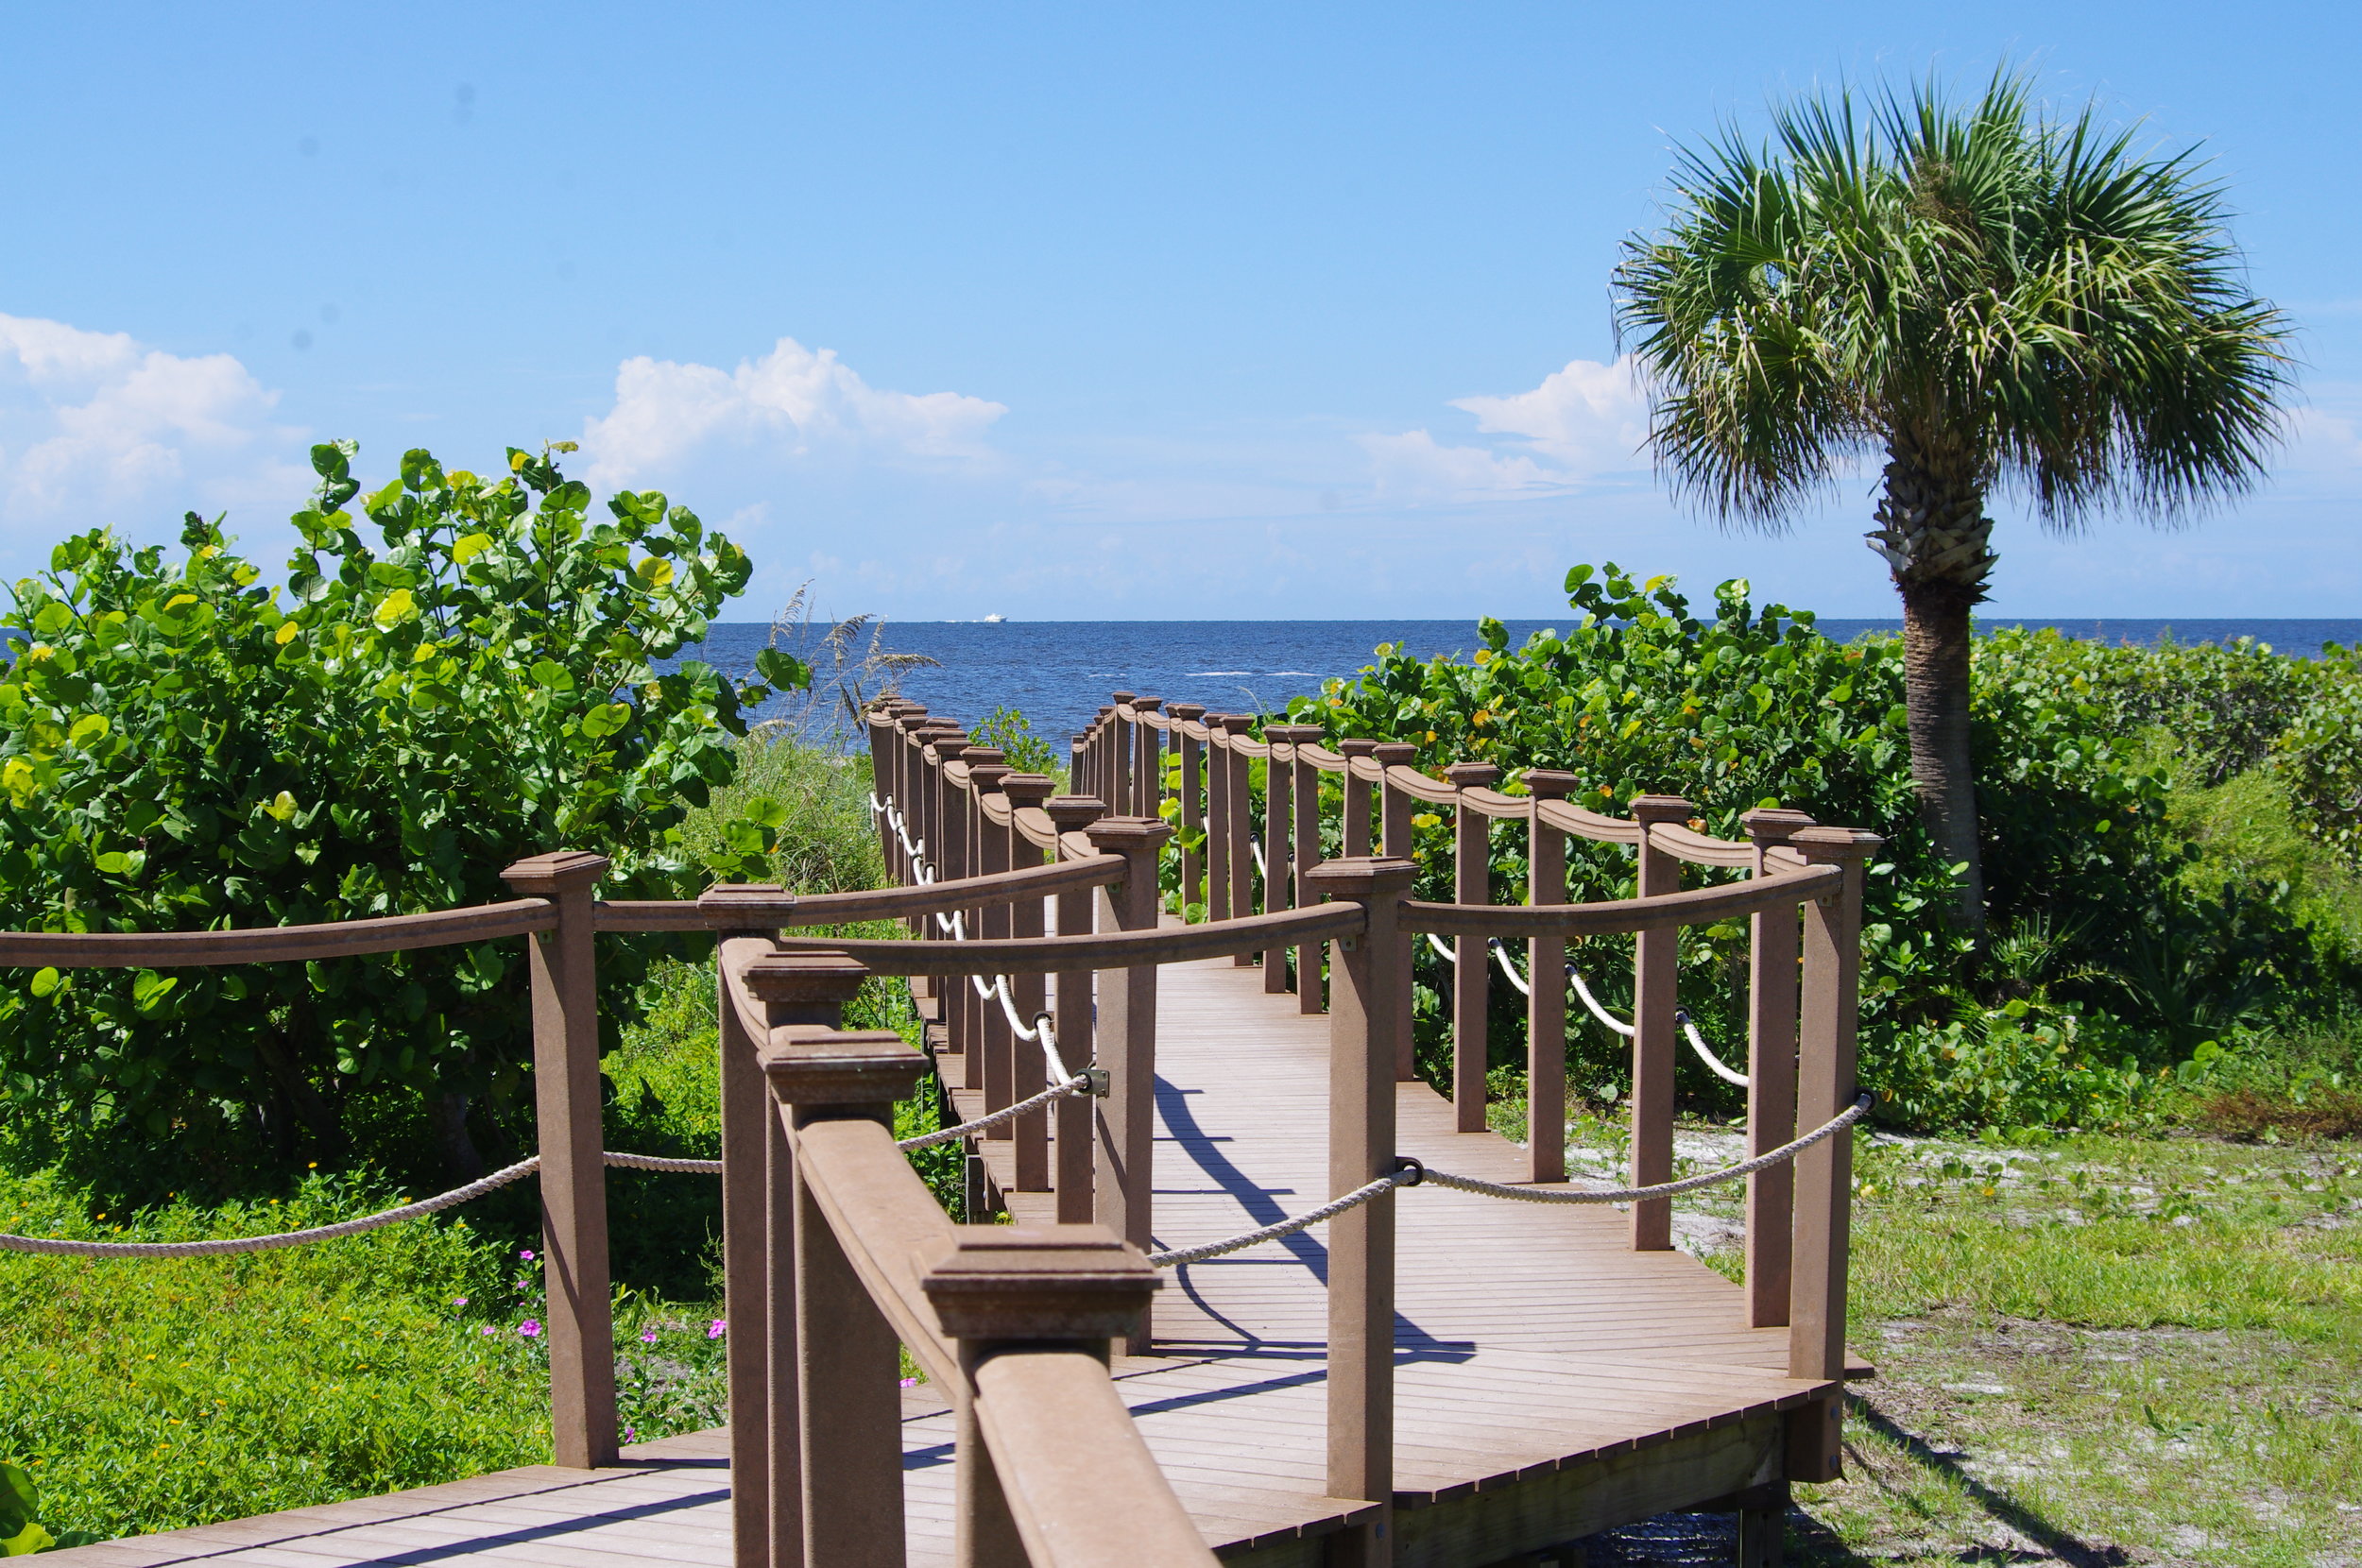  The beach and Gulf of Mexico are waiting for you! 